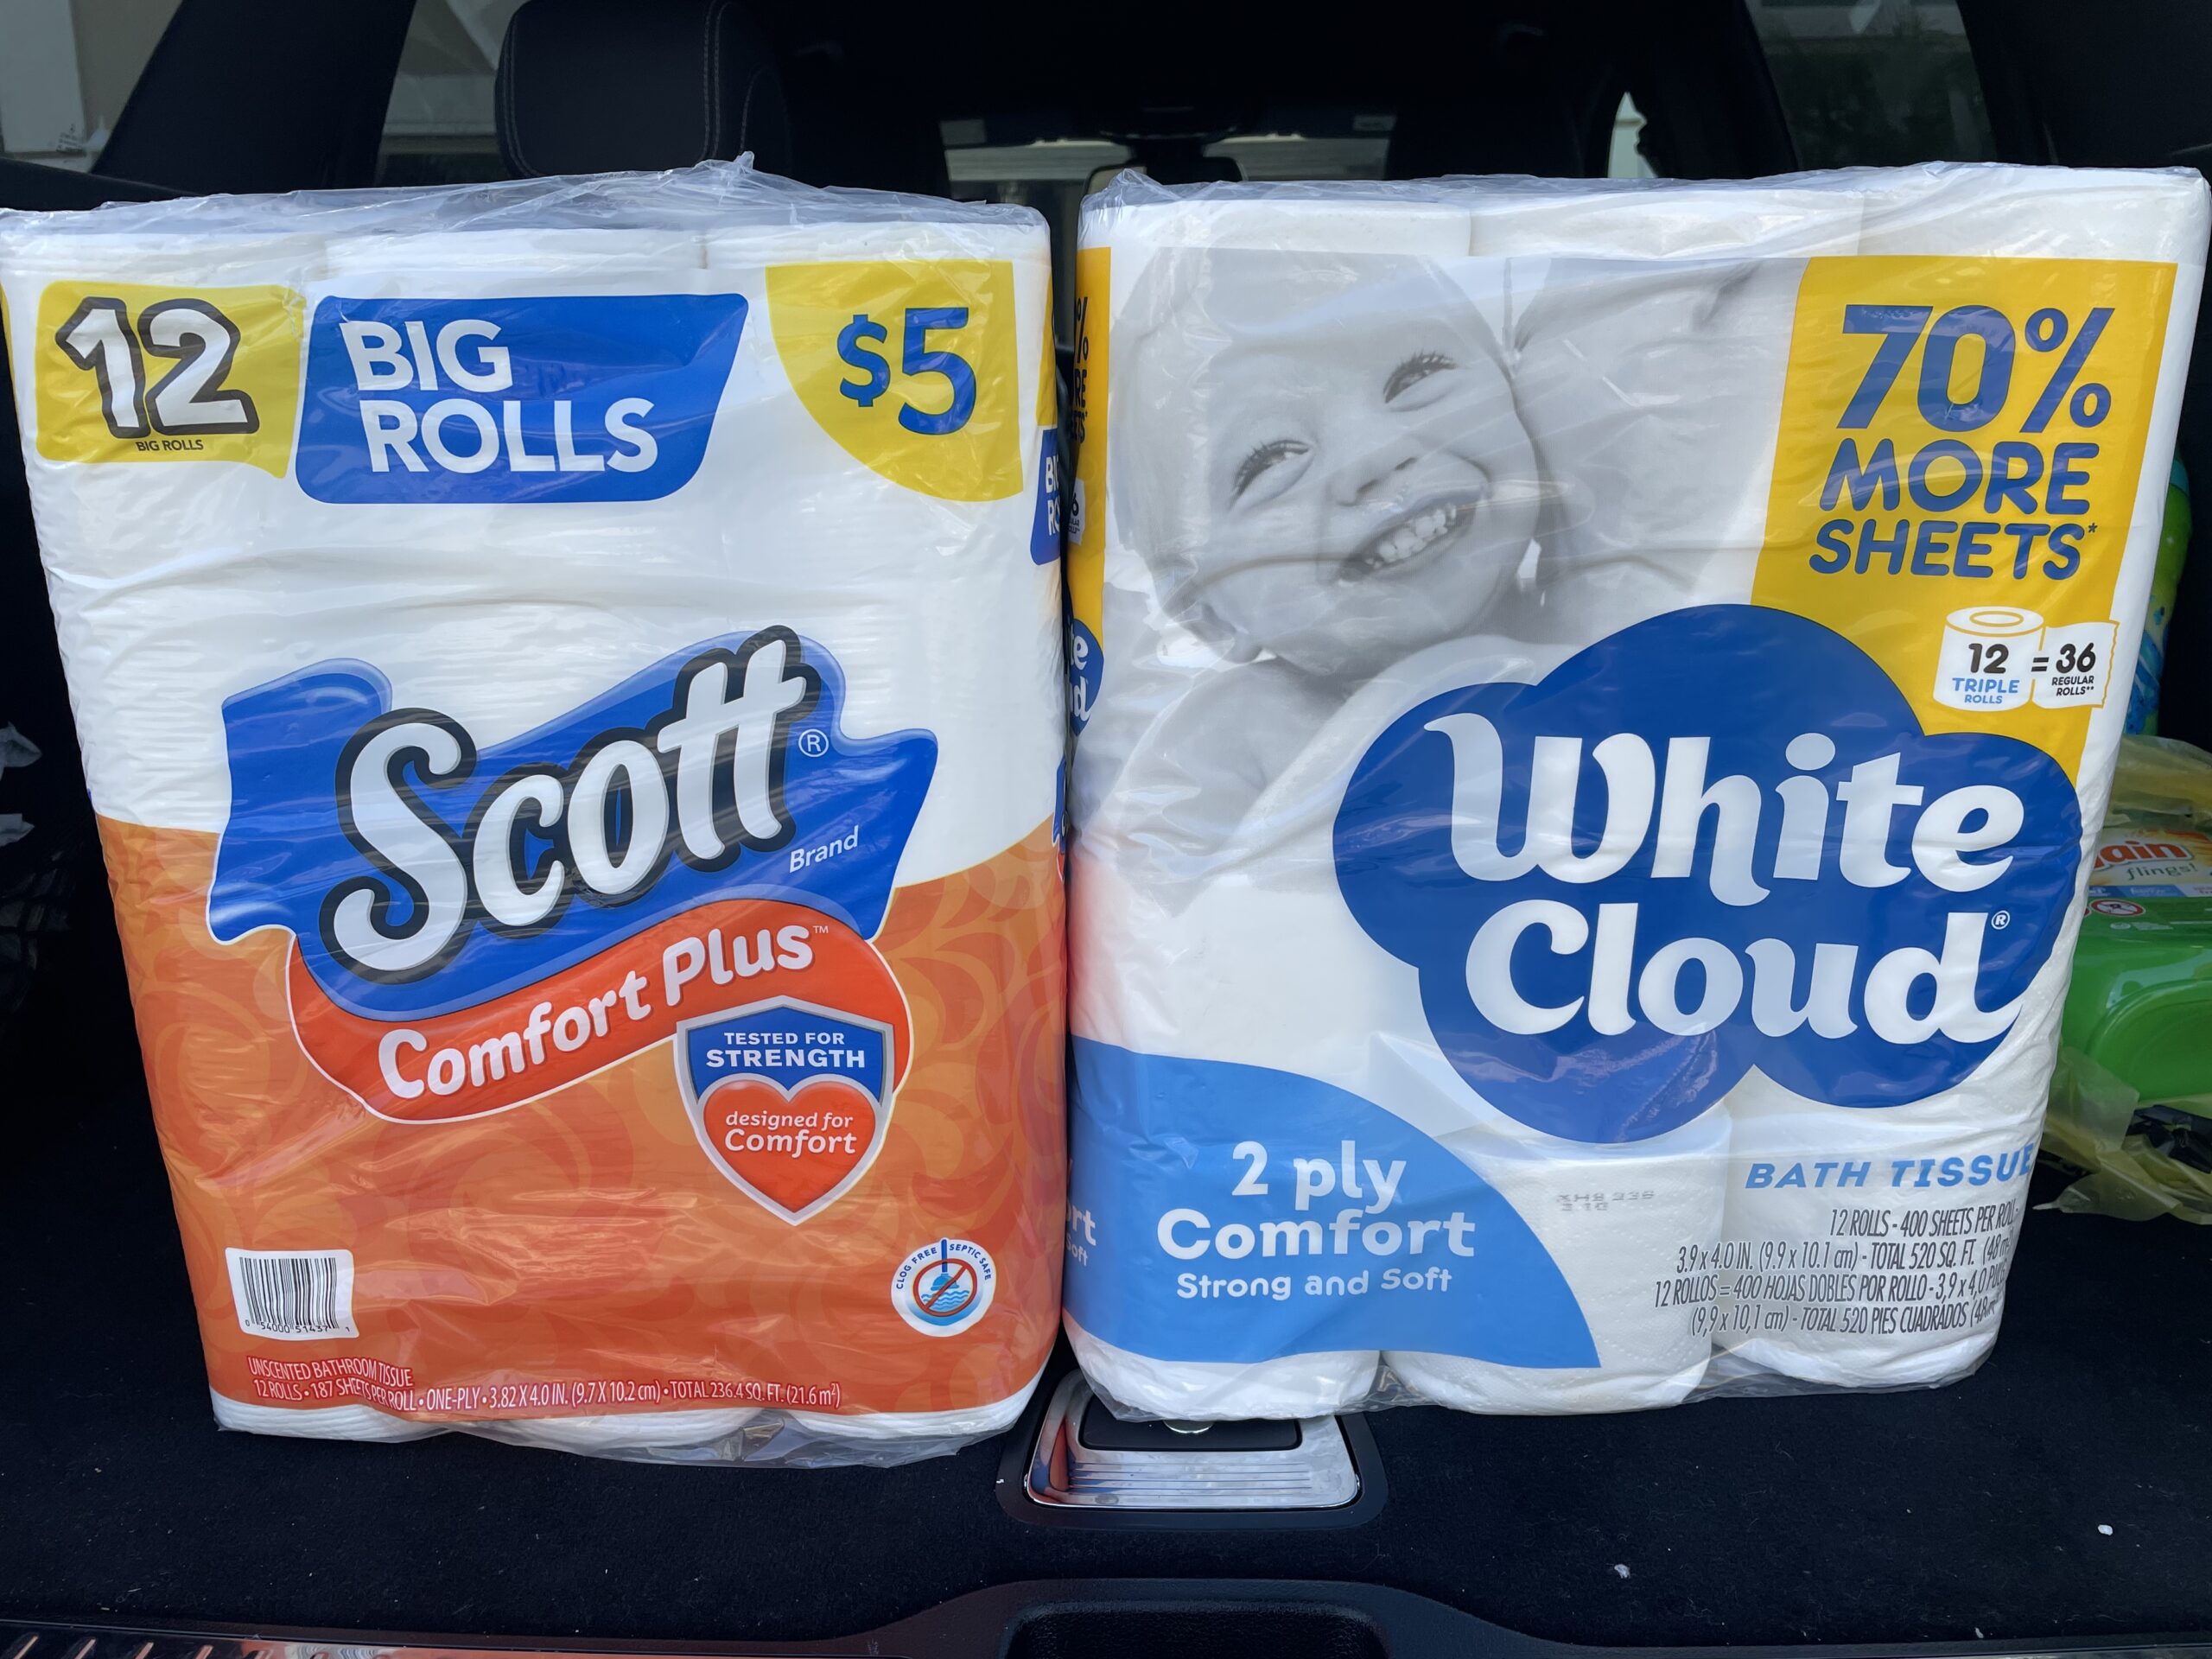 Huge Clearance on Toilet Tissue at Home Depot!